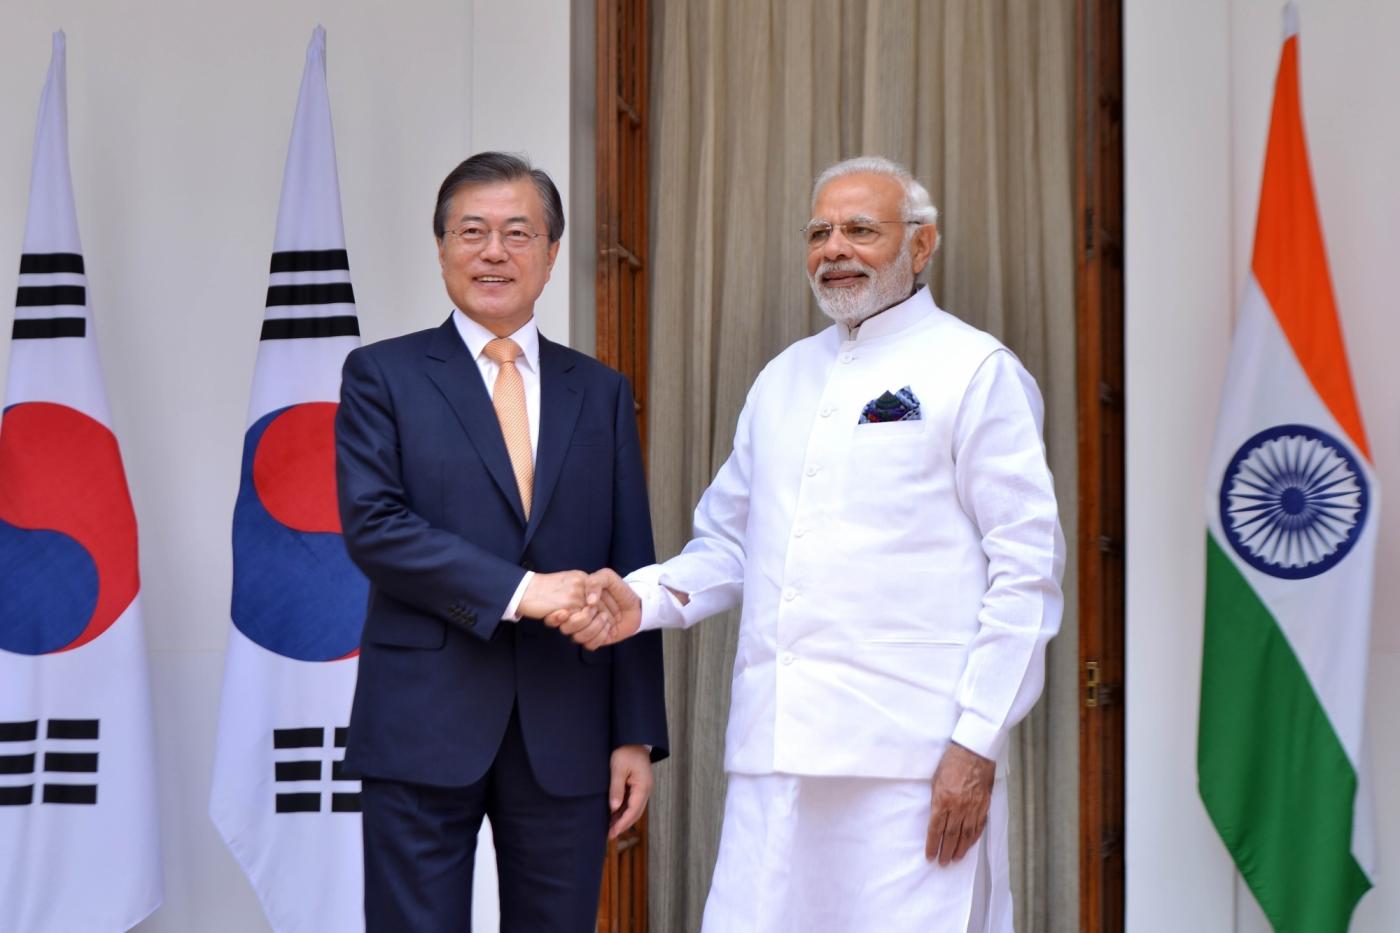 New Delhi: Prime Minister Narendra Modi and South Korean President Moon Jae-in head for a meeting at Hyderabad House, in New Delhi on July 10, 2018. (Photo: IANS) by .